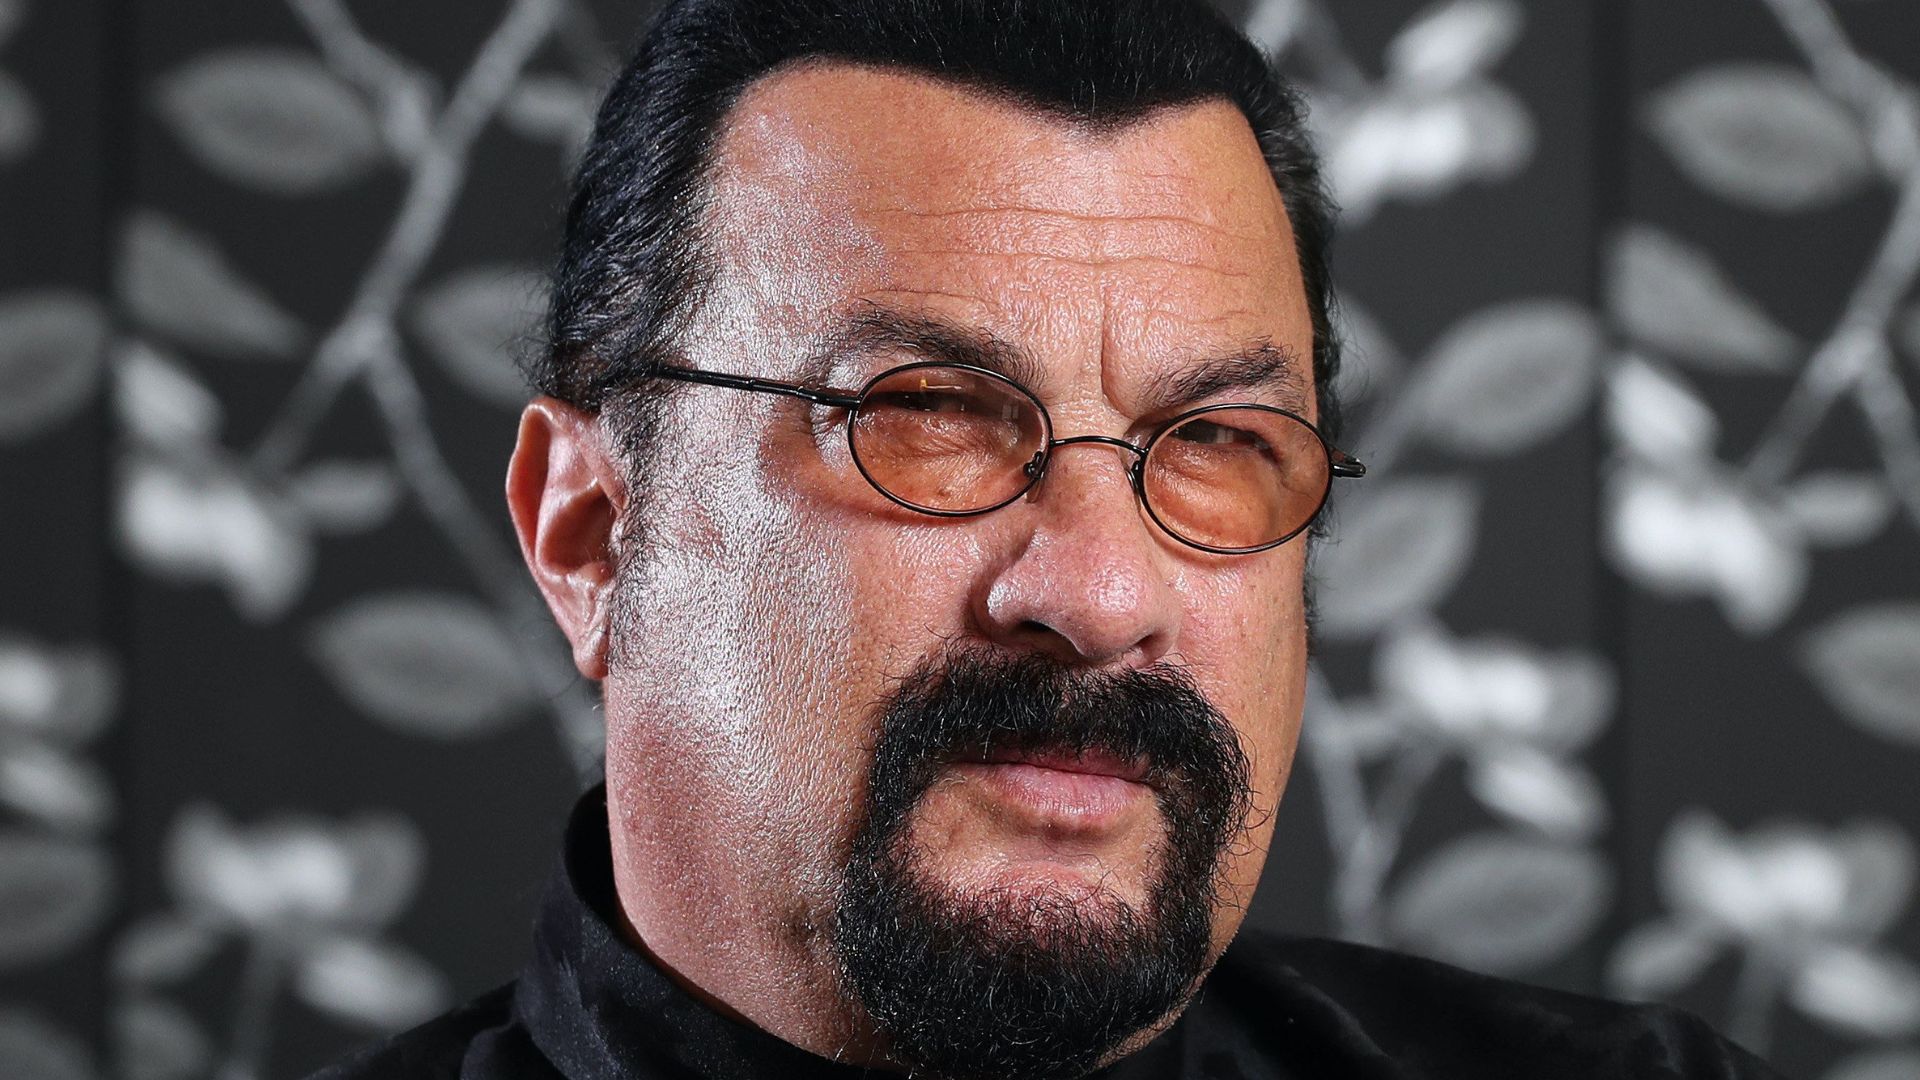 Steven Seagal With French Cut